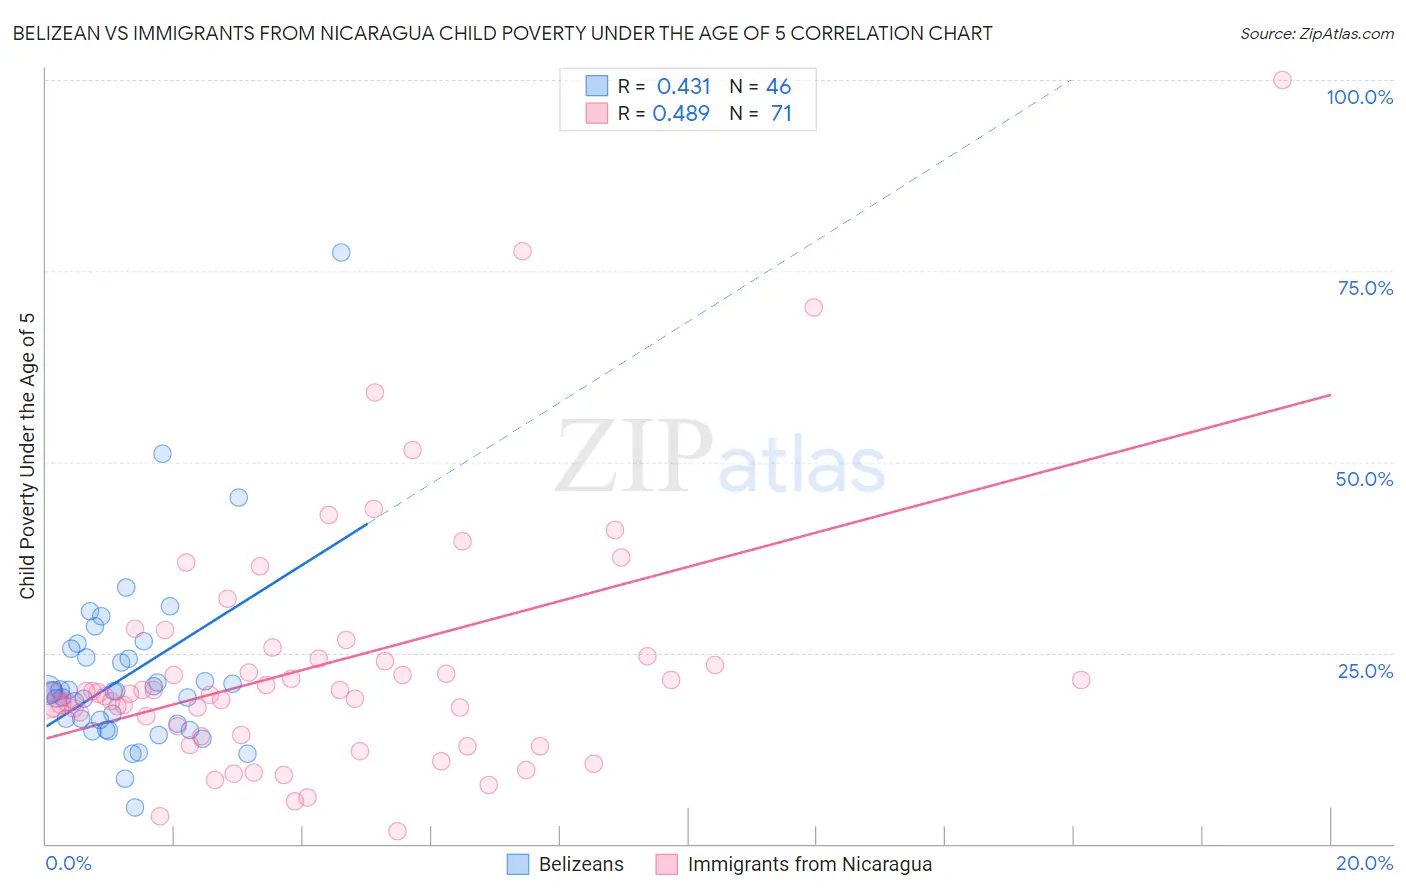 Belizean vs Immigrants from Nicaragua Child Poverty Under the Age of 5